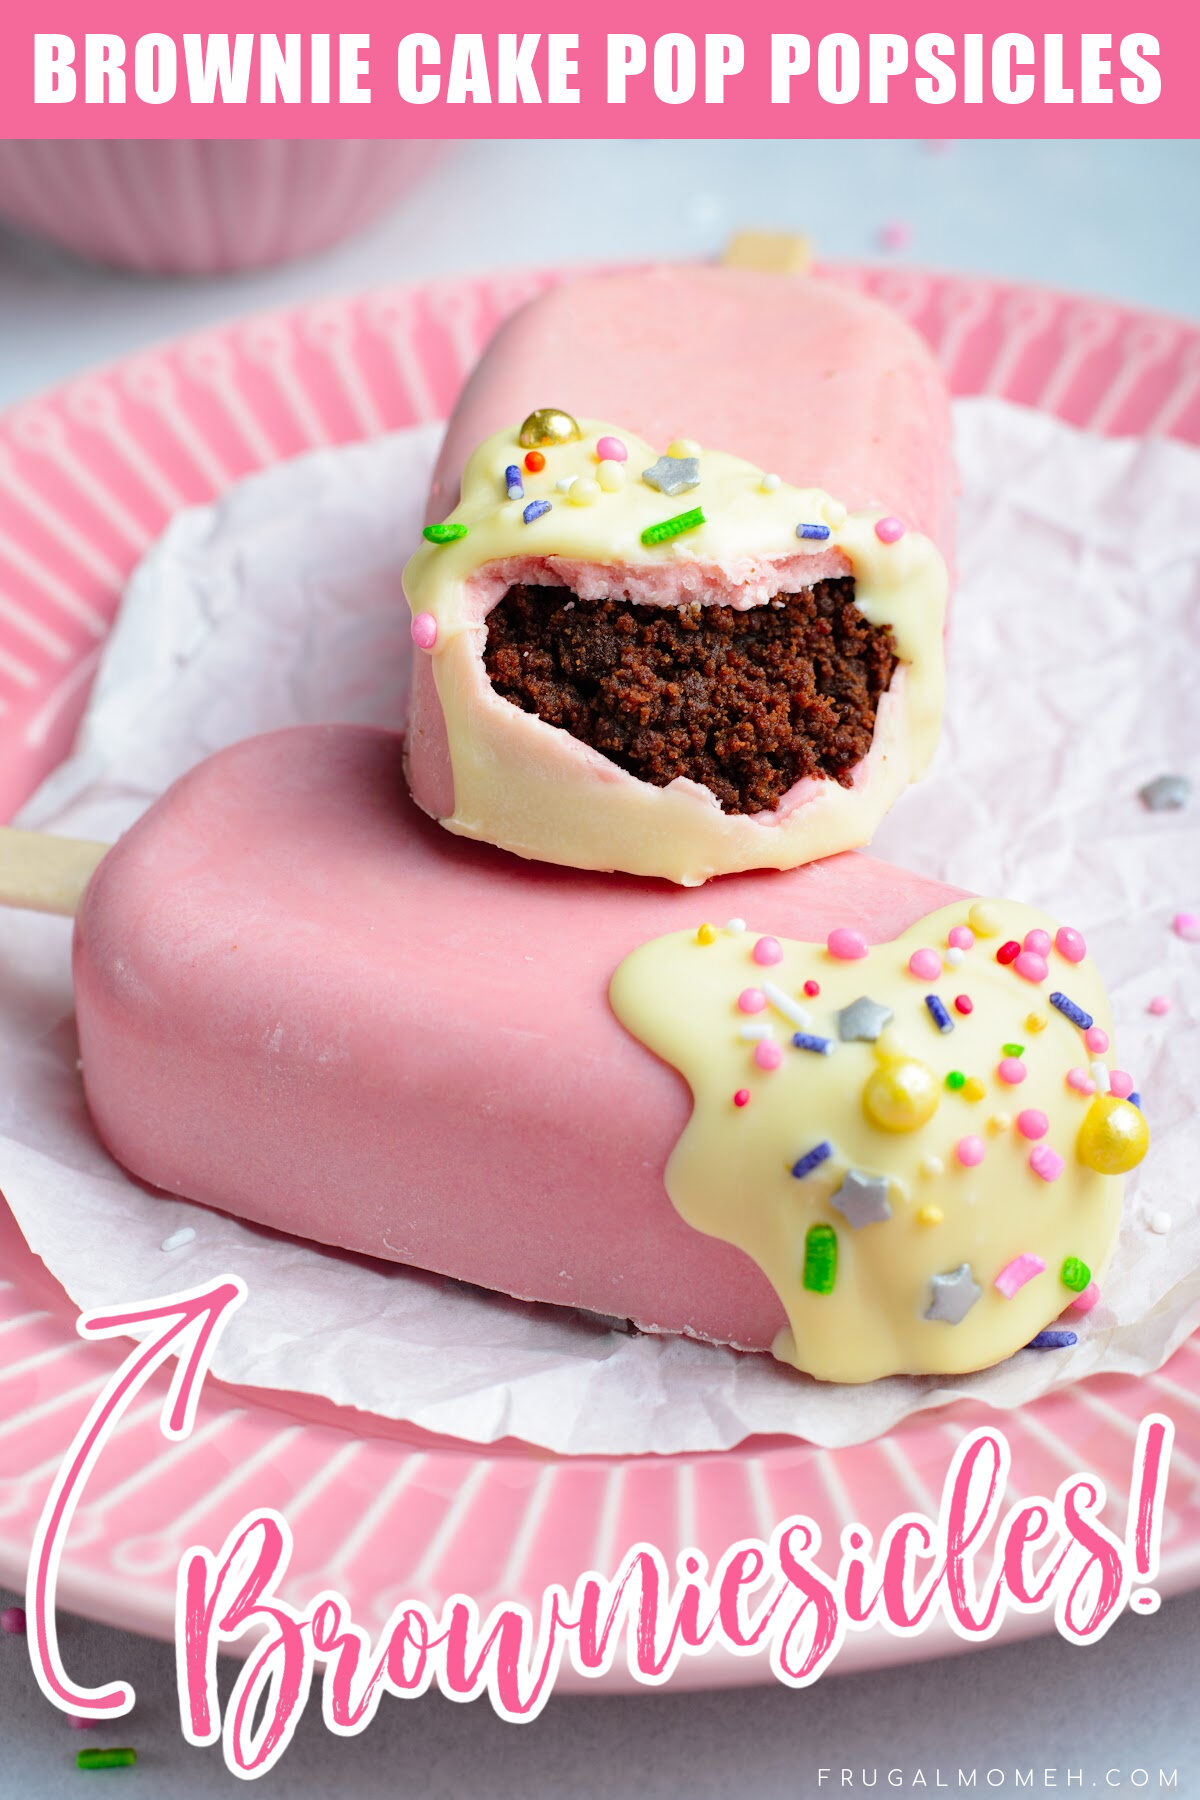 Try this recipe for browniesicles, a delicious twist on cake pops. They're shaped like pink "popsicles" with colourful sprinkles.